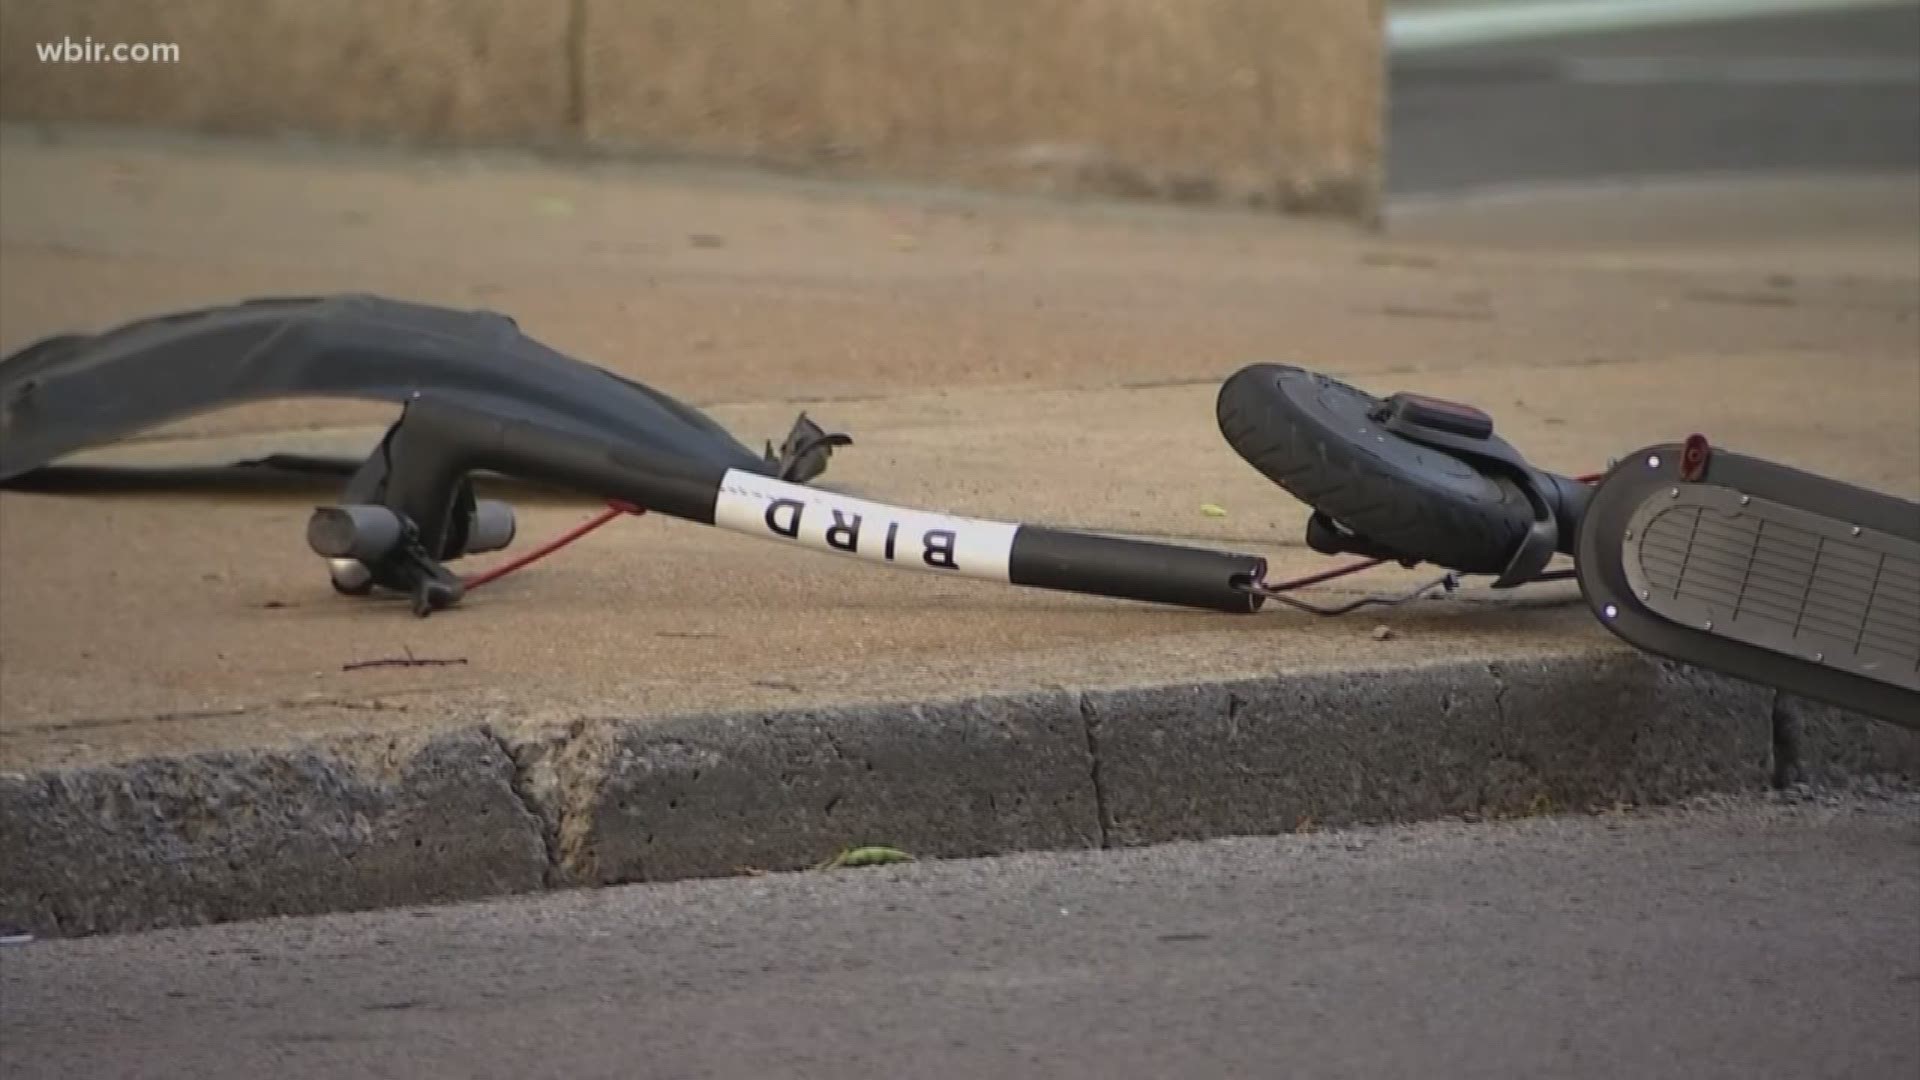 Police said Lindsey Cowan, 28, of Knoxville and Rachel Johnson, 27, of Oak Ridge were riding scooters when they collided with a Lexus in the middle of the intersection with Union Street and 5th Avenue North in Nashville.